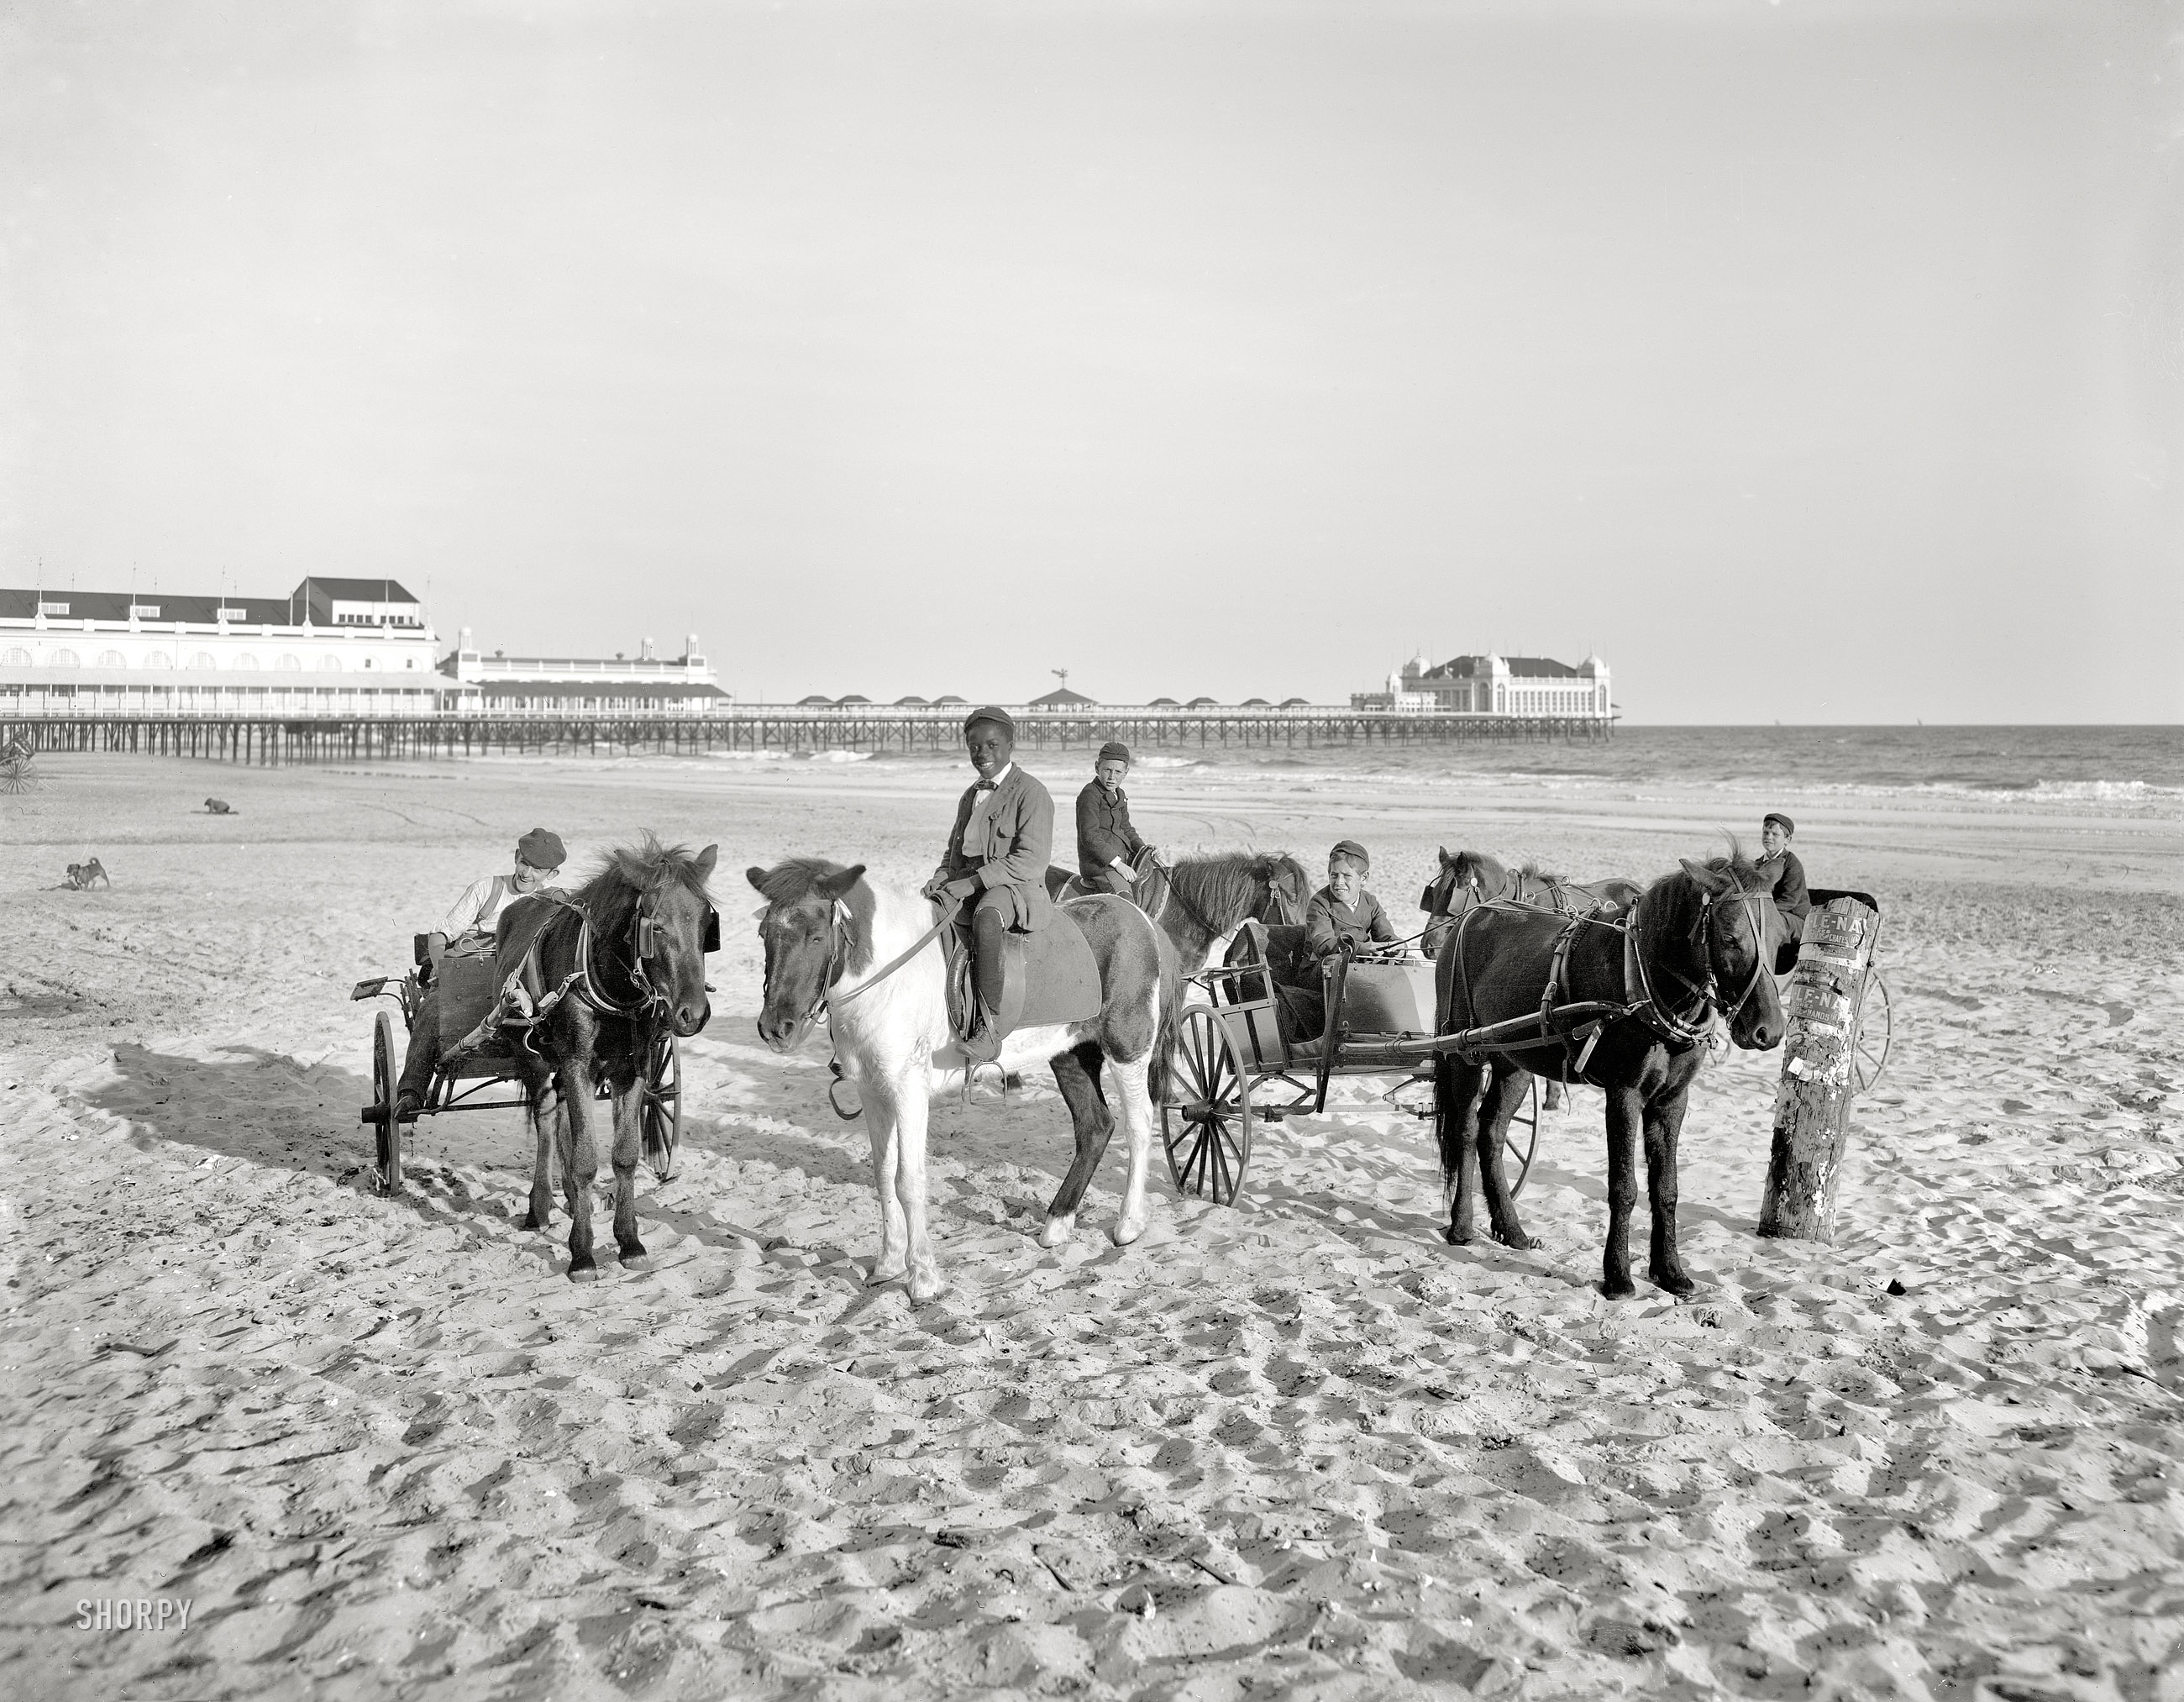 The Jersey Shore circa 1905. "Ponies on the beach -- Atlantic City." In the distance, the Steeplechase and Steel piers. 8x10 glass negative. View full size.